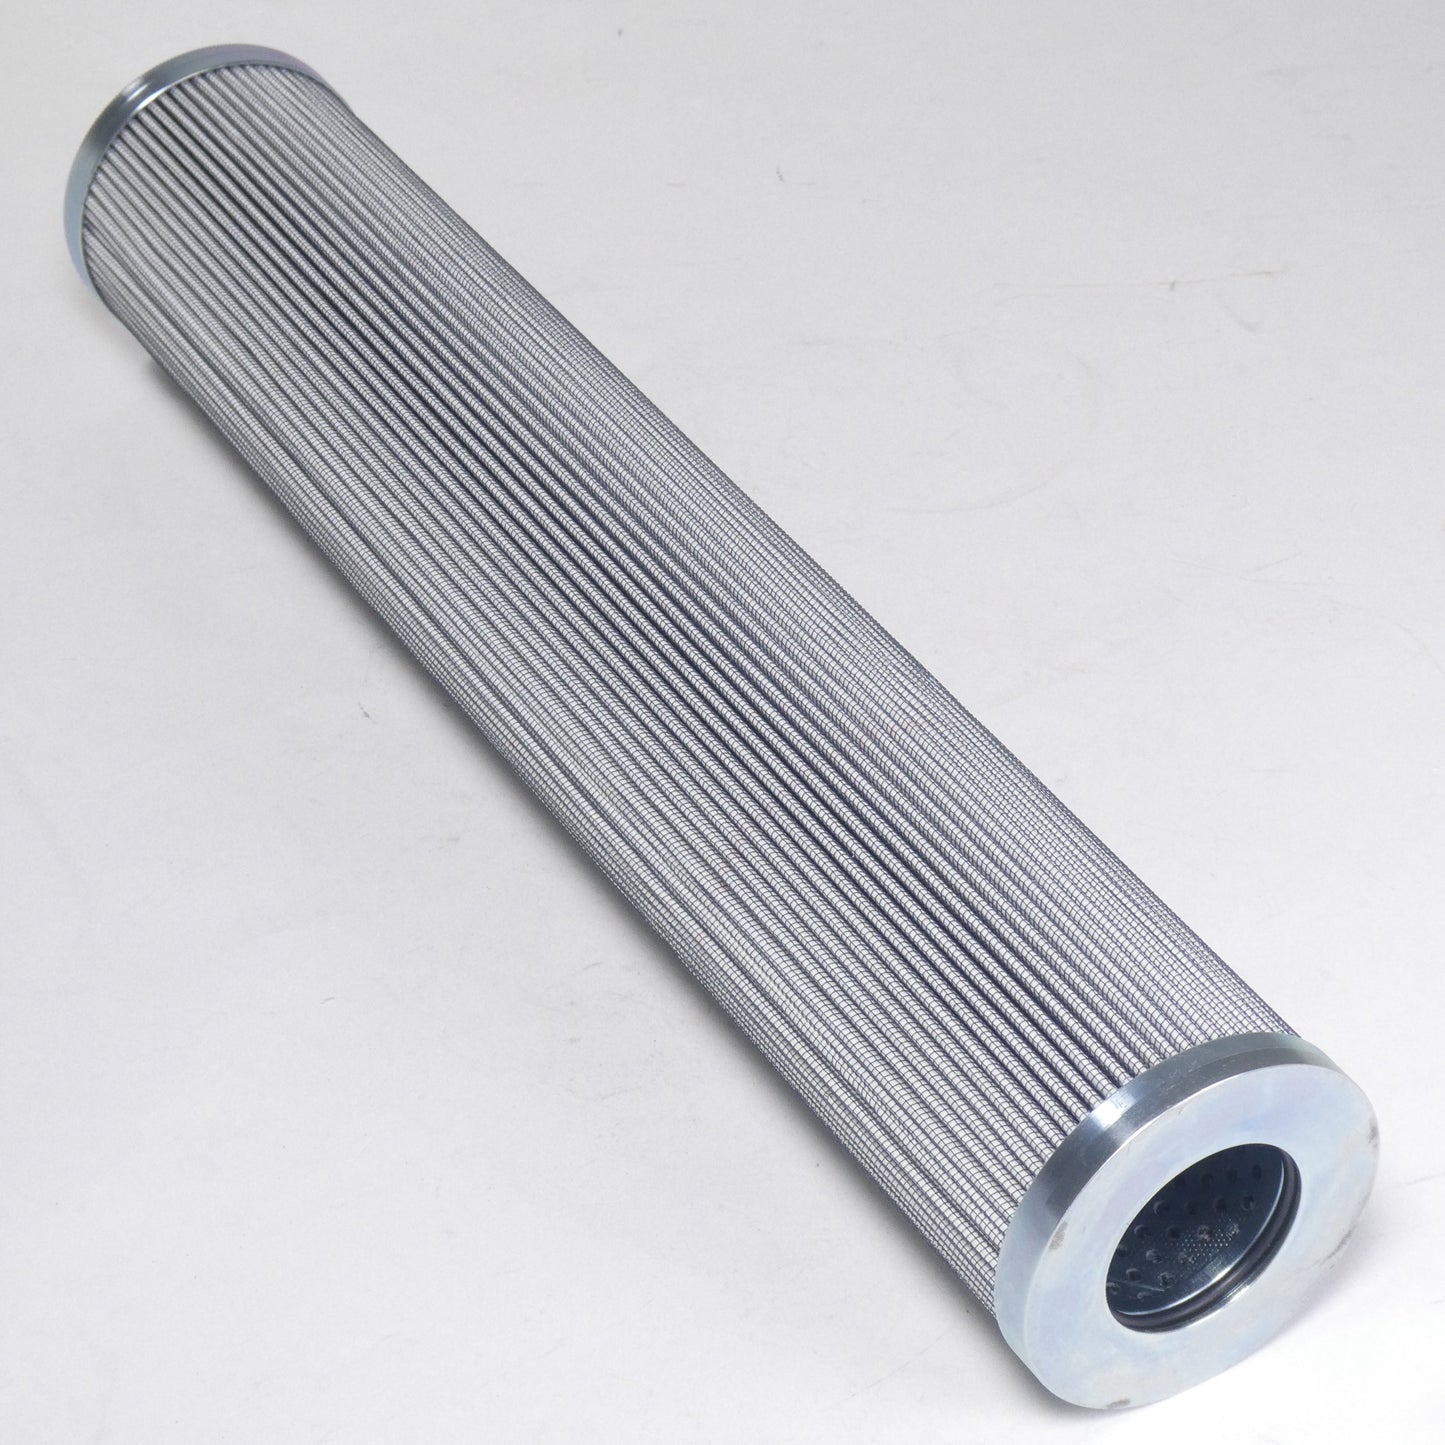 Hydrafil Replacement Filter Element for Pall AC9601FMT16J